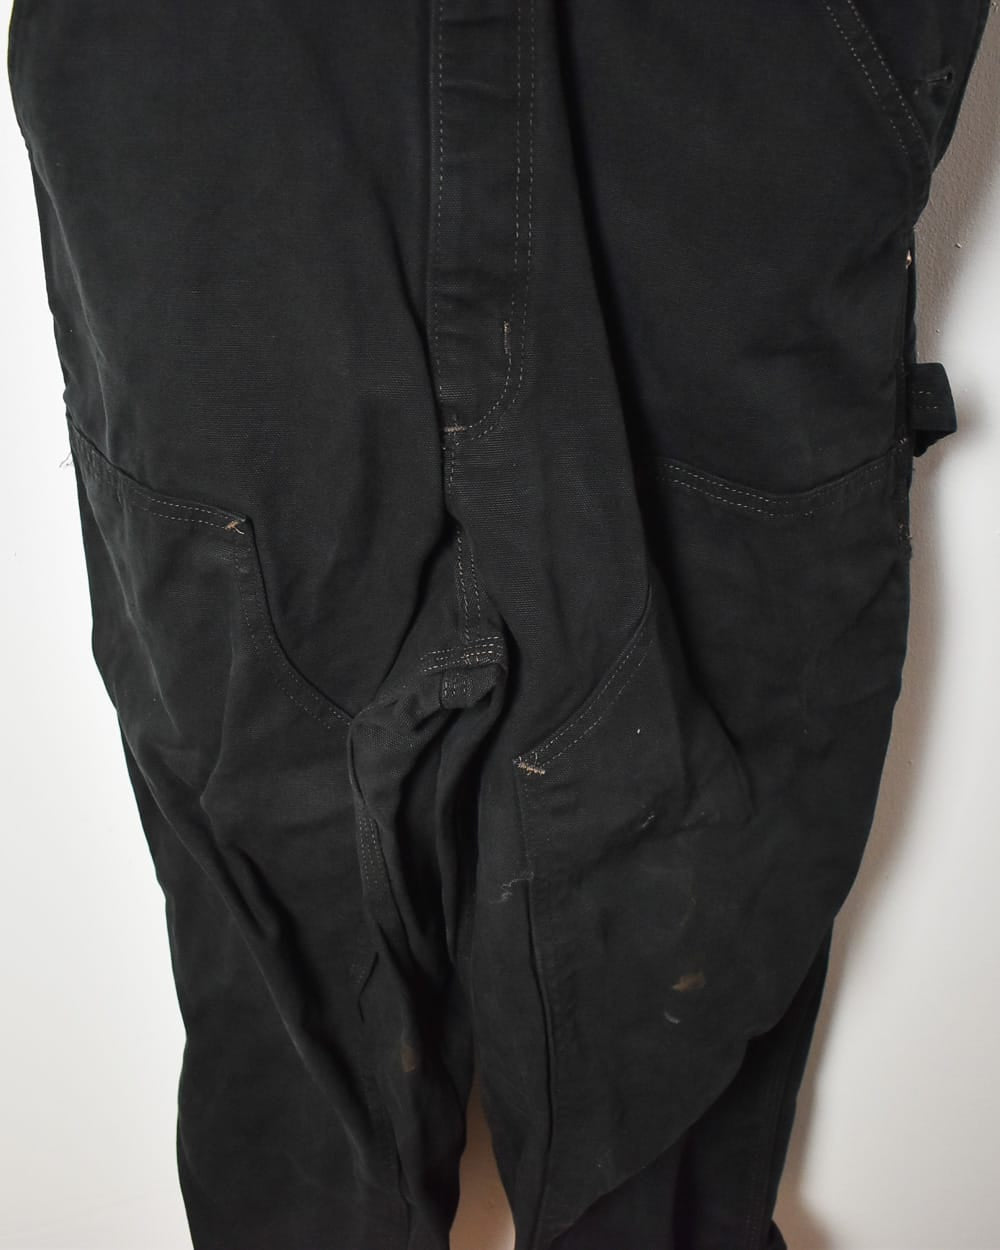 Black Carhartt Workwear Double Knee Dungarees - W36 L31